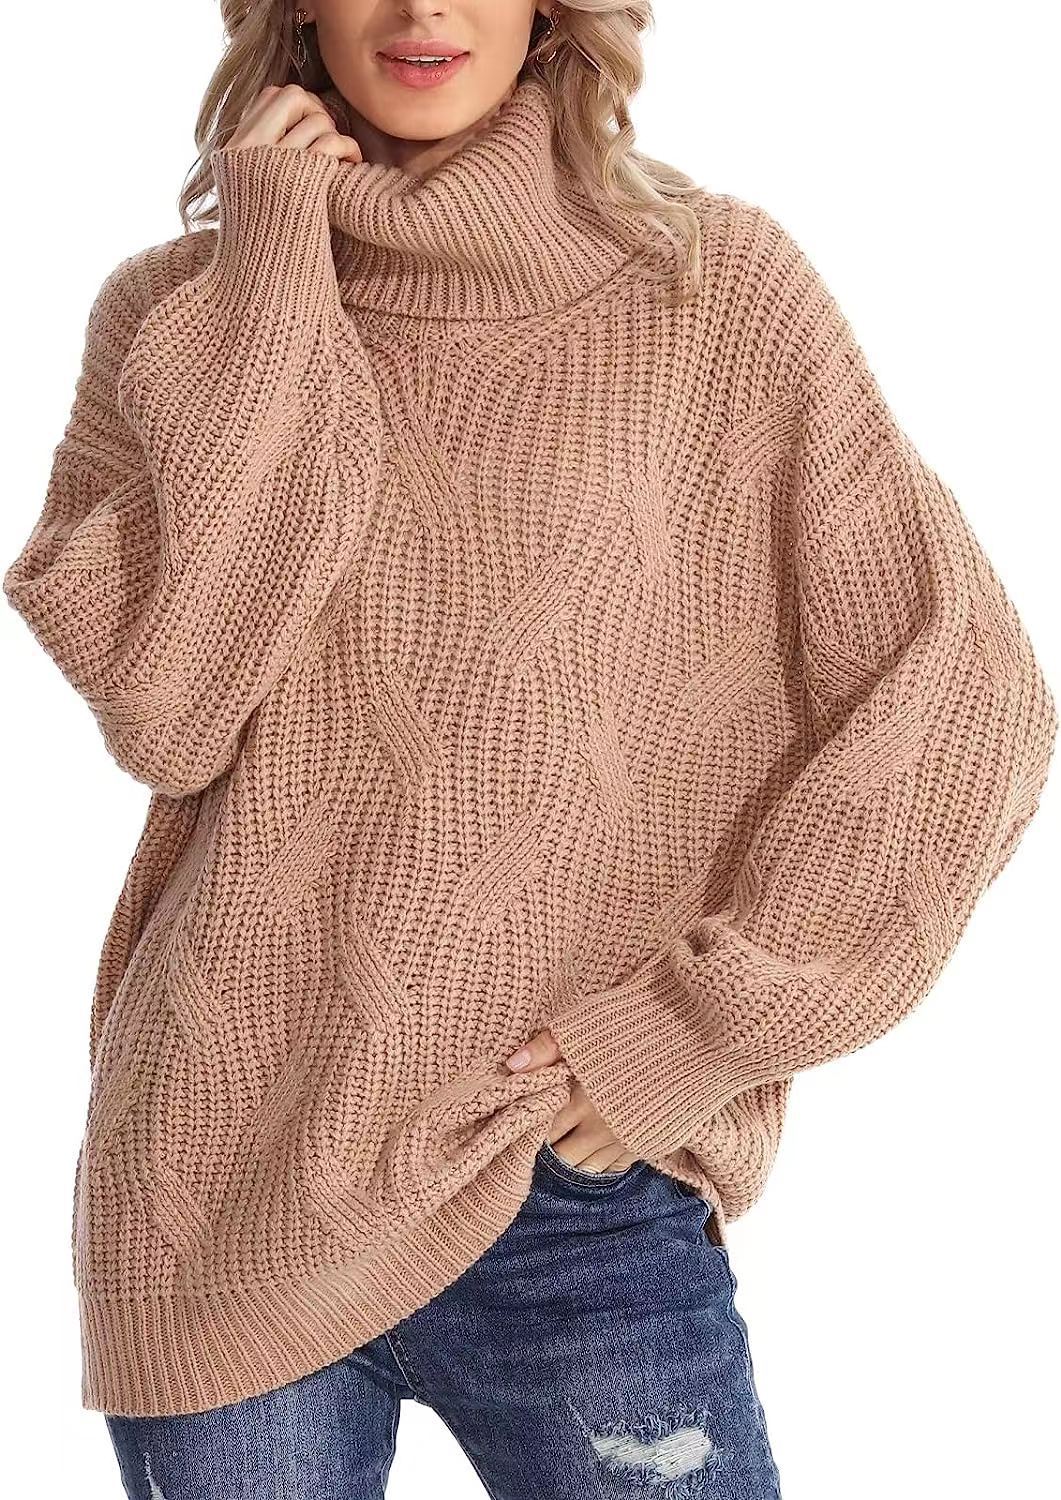 Women's Fashion Loose High Collar Twisted Knitted Sweater Pullover Long Sleeve